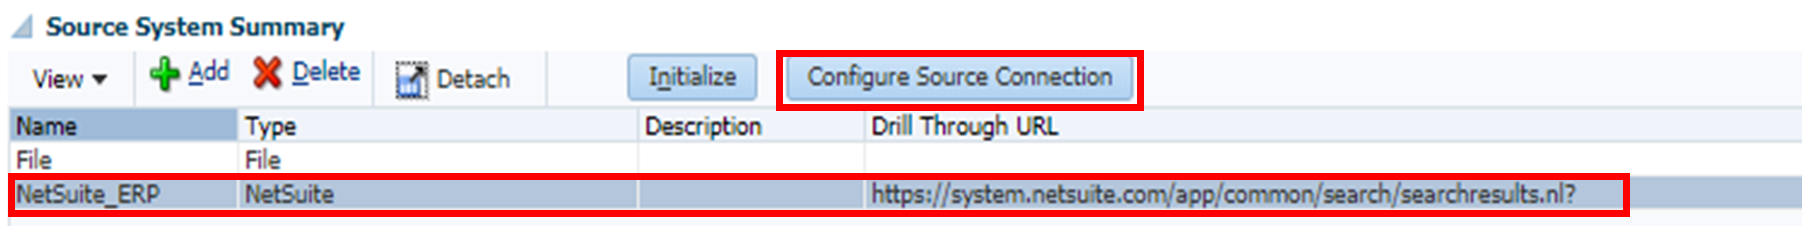 A portion of Data Management to show the Source System summary and the Configure Source Connection.